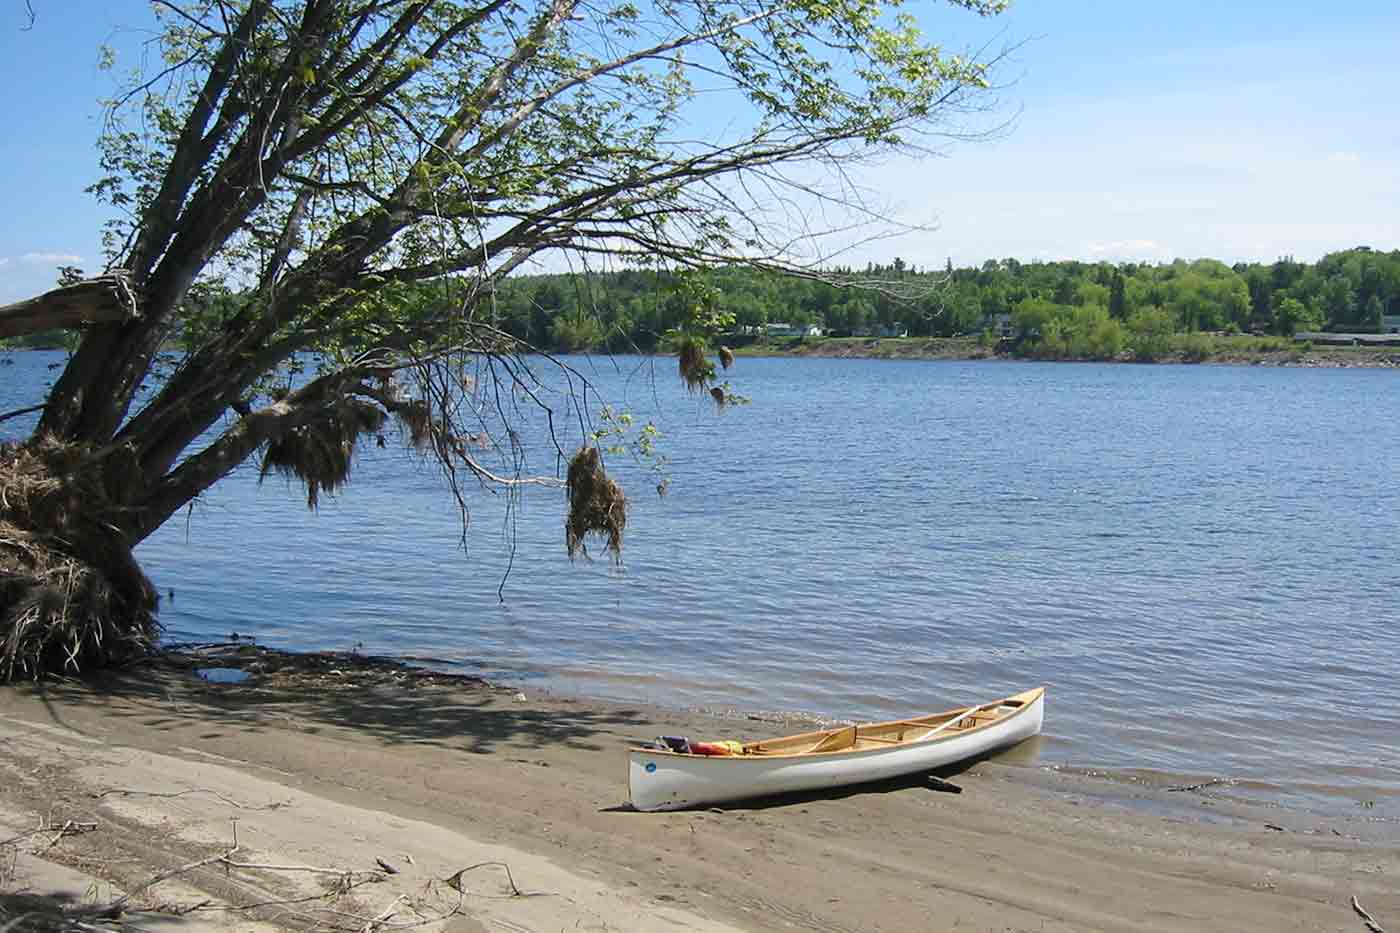 Outdoor Activities to do in Fredericton